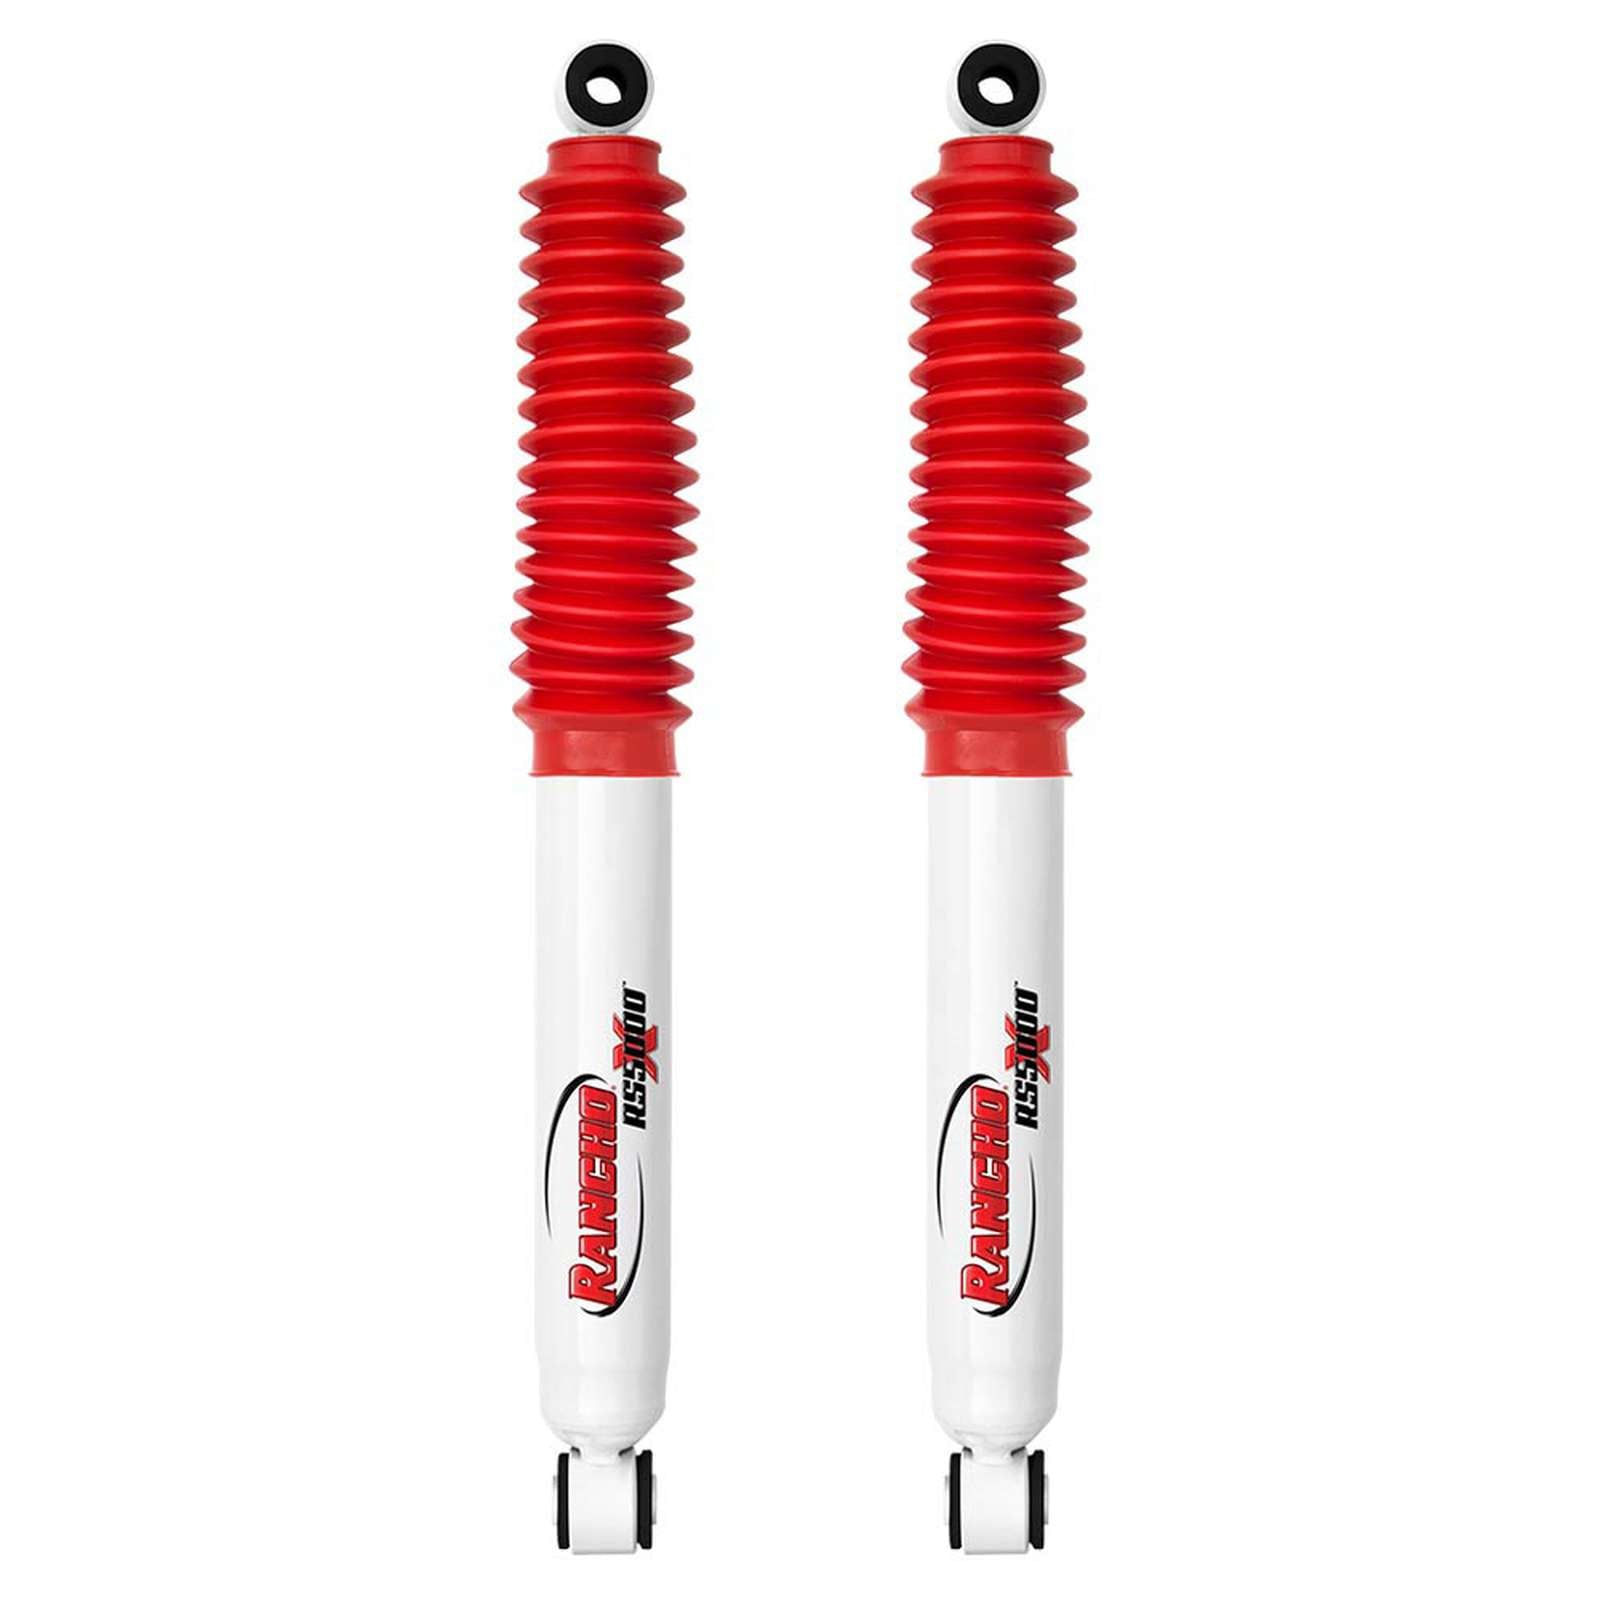 Rancho RS5000X Gas Shocks Rear for 97-04 Frontier 4WD 0 lift CrewCab